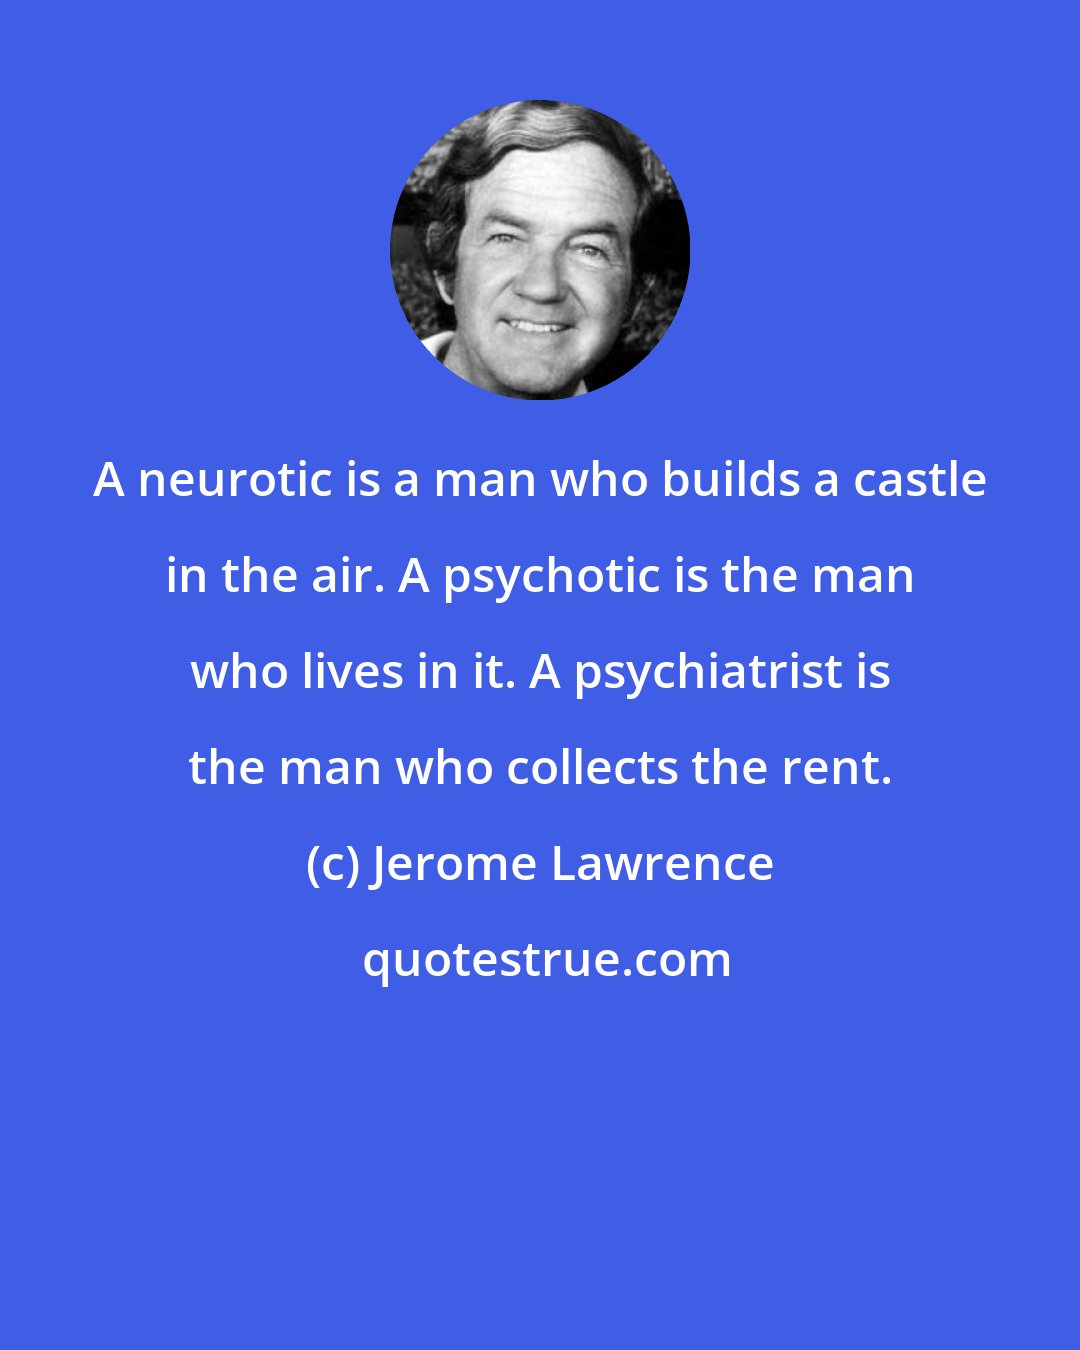 Jerome Lawrence: A neurotic is a man who builds a castle in the air. A psychotic is the man who lives in it. A psychiatrist is the man who collects the rent.